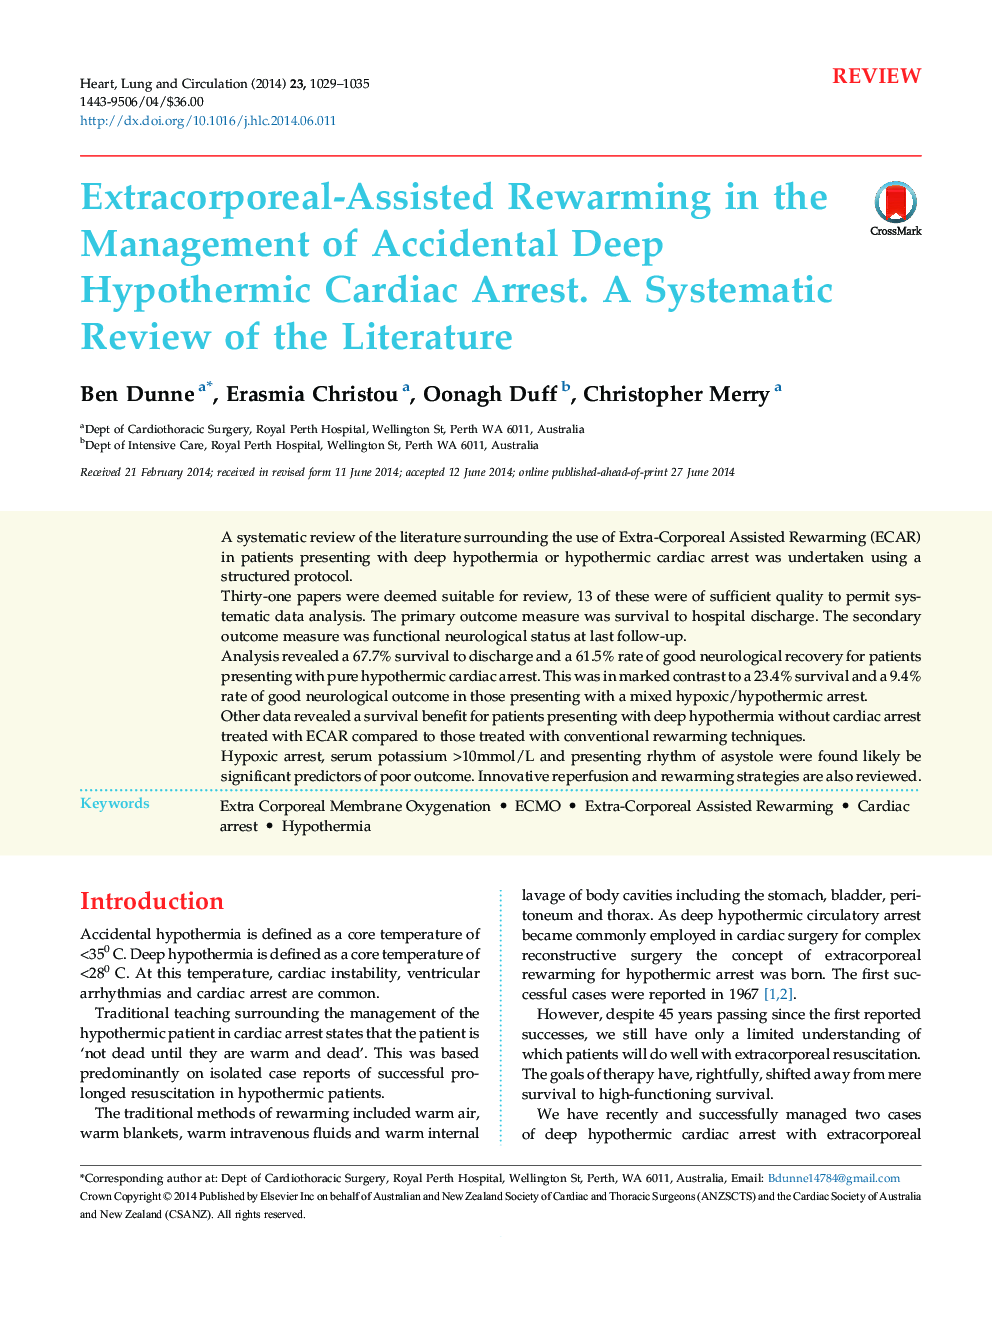 Extracorporeal-Assisted Rewarming in the Management of Accidental Deep Hypothermic Cardiac Arrest: A Systematic Review of the Literature